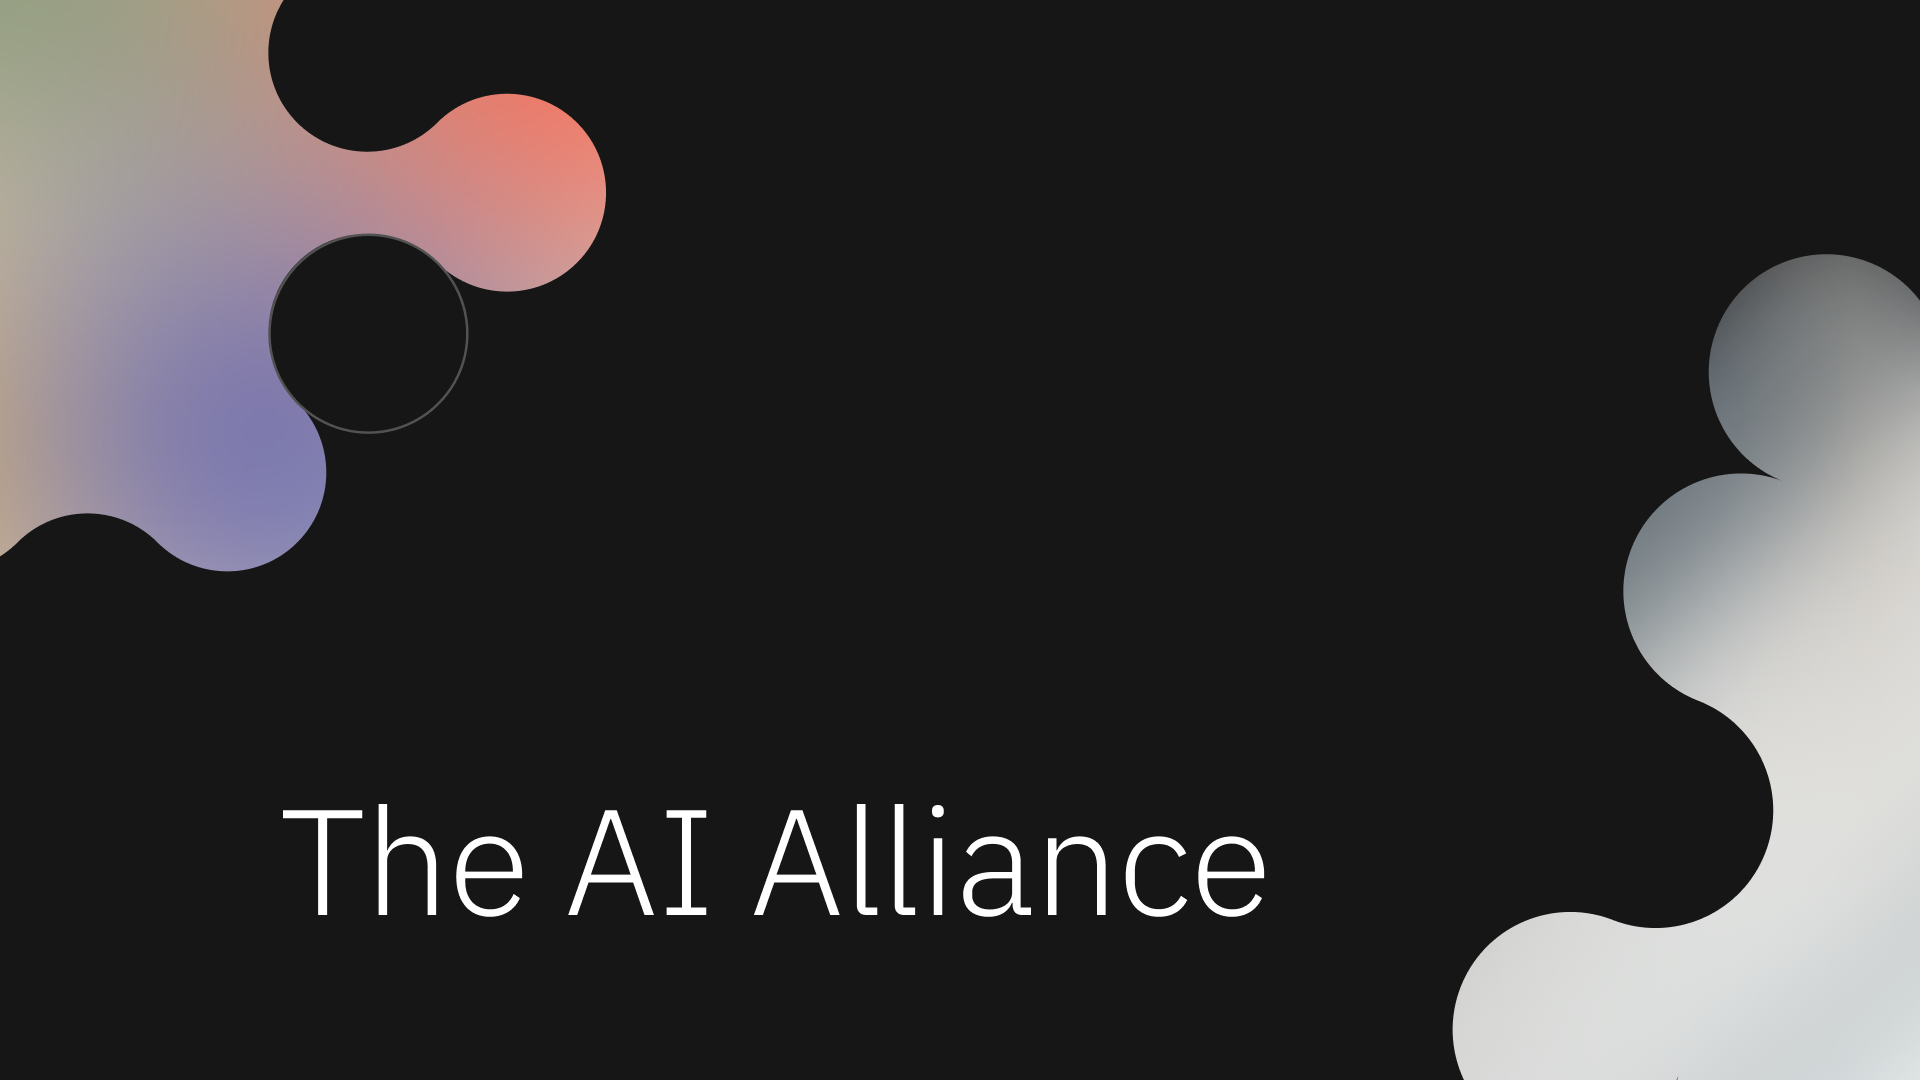 AI Alliance Launches as an International Community of Leading Technology Developers, Researchers, and Adopters Collaborating Together to Advance Open, Safe, Responsible AI